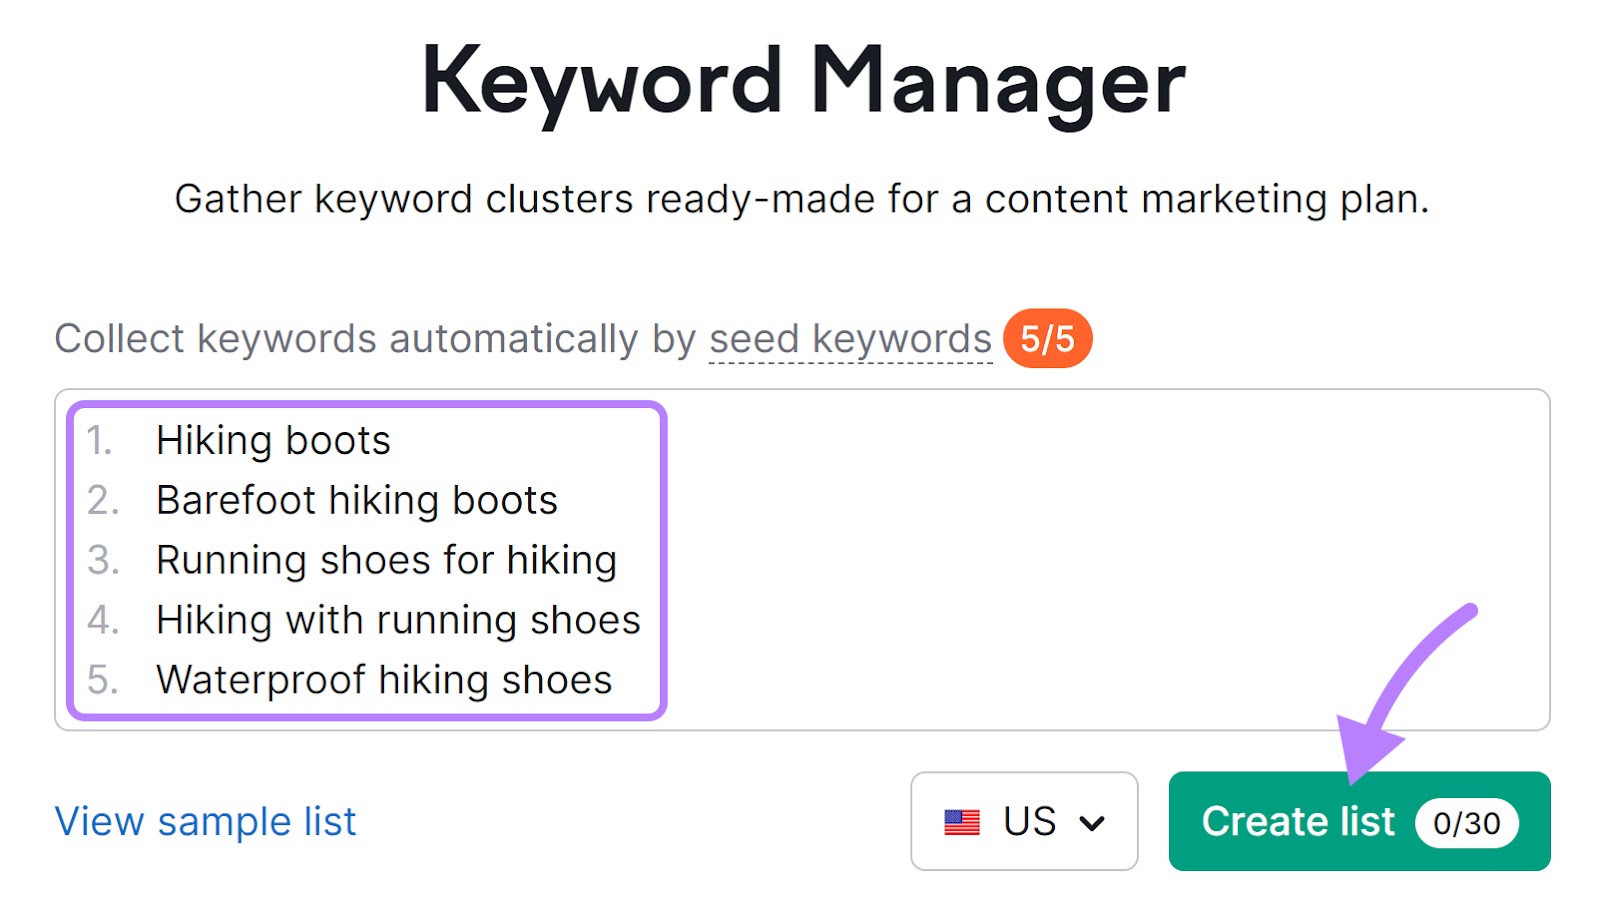 hiking boots, barefoot hiking boots, moving  shoes for hiking, hiking with moving  shoes, and waterproof hiking shoes entered into the Keyword Manager tool